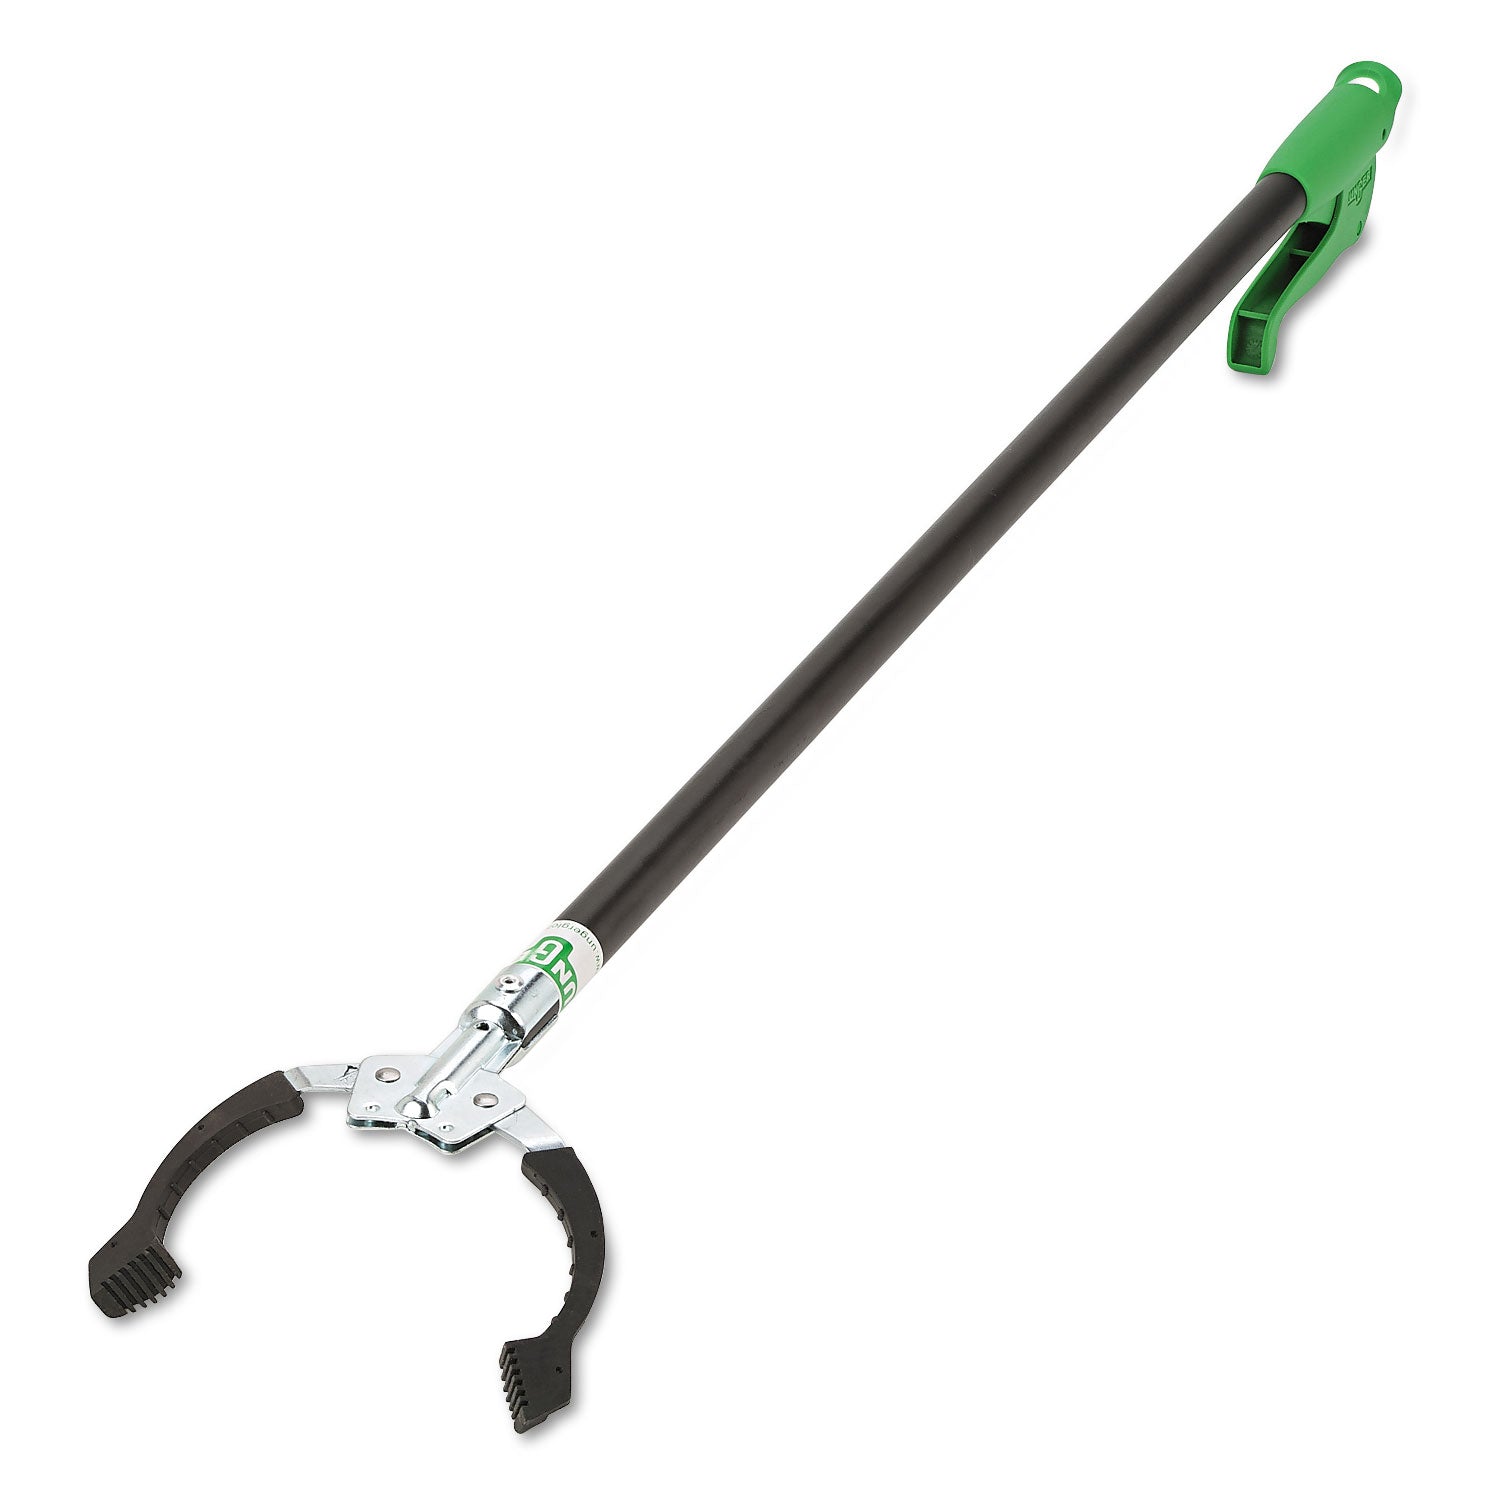 Nifty Nabber Extension Arm with Claw, 51", Black/Green - 